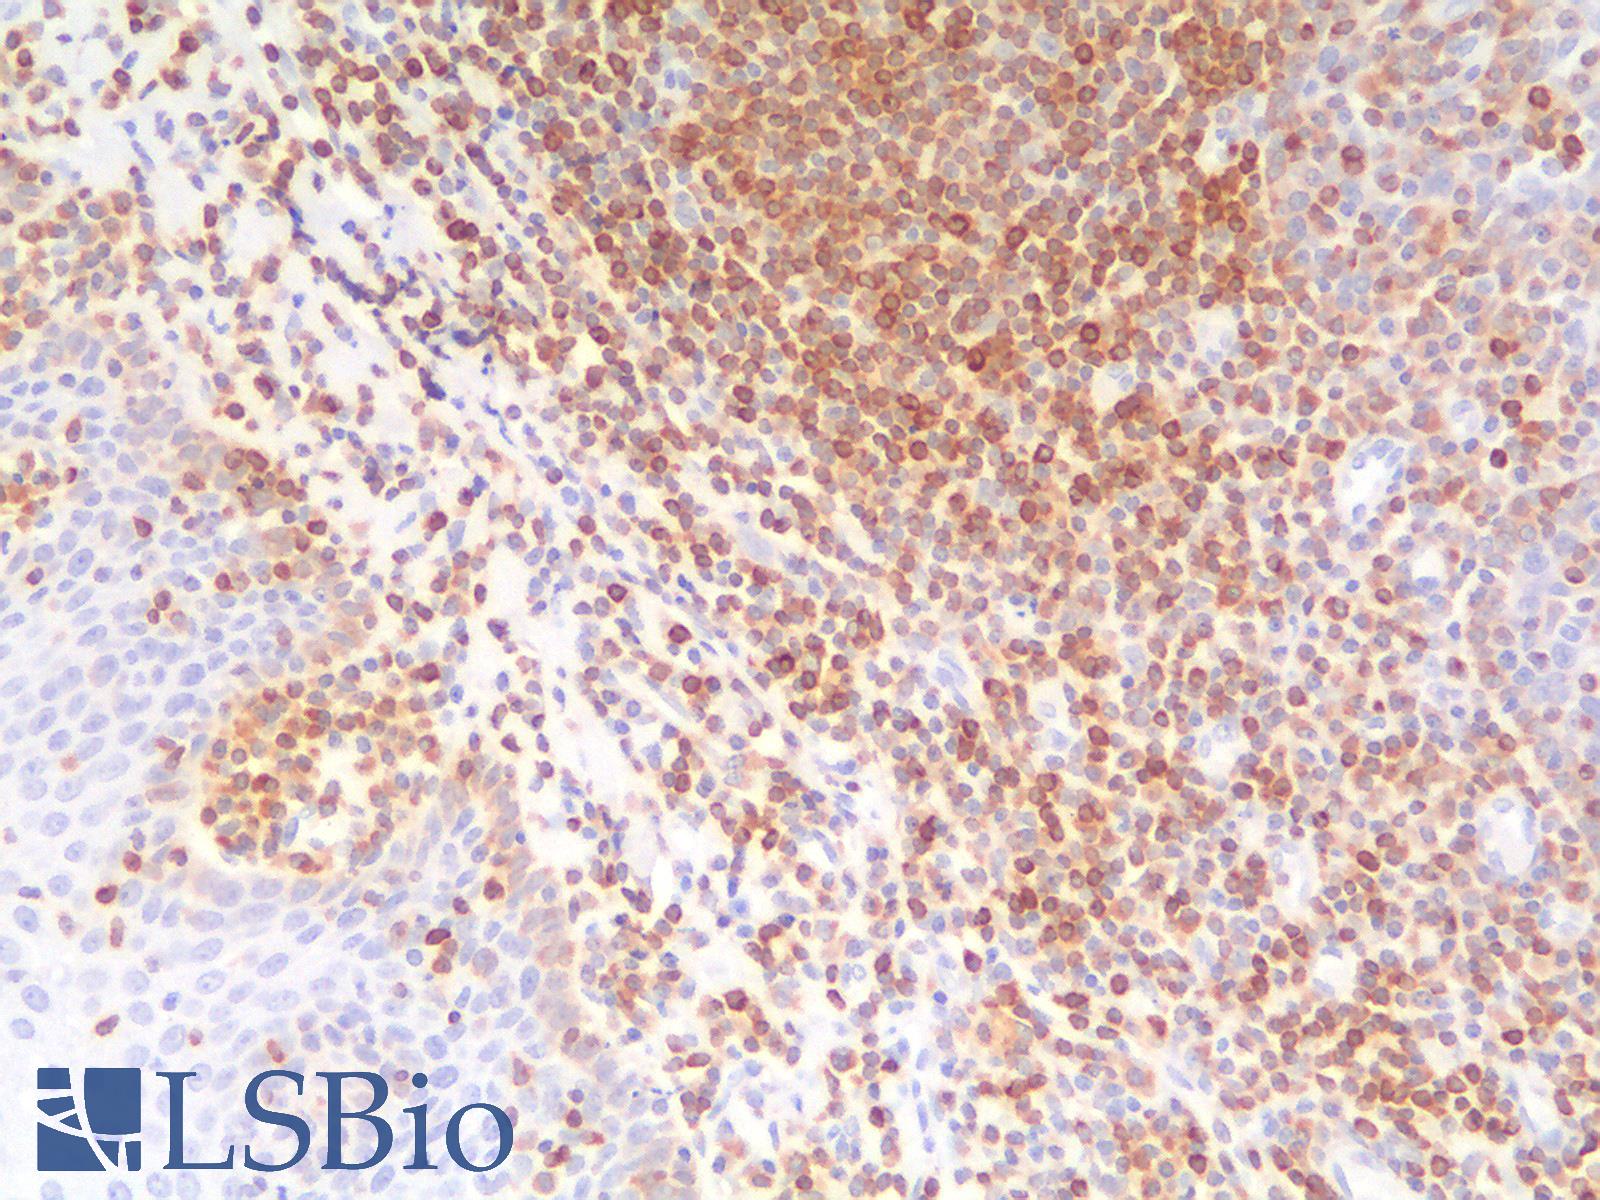 BCL2 / Bcl-2 Antibody - Human Tonsil: Formalin-Fixed, Paraffin-Embedded (FFPE)